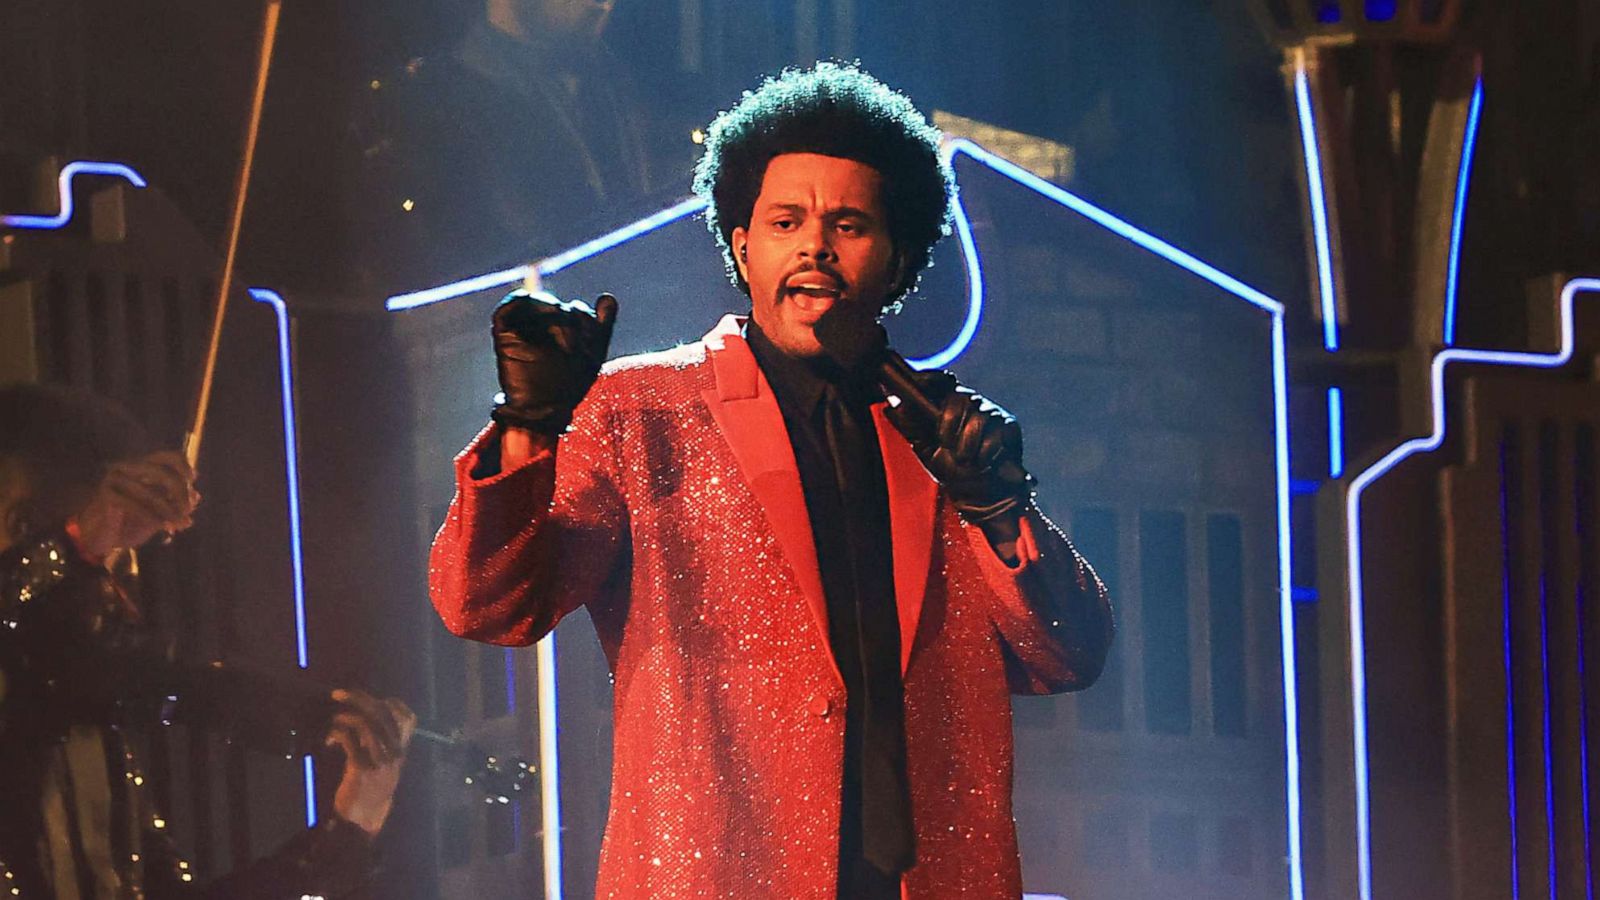 The Weeknd Will Have No Special Guests at Super Bowl Halftime Show -   - The Latest Electronic Dance Music News, Reviews & Artists